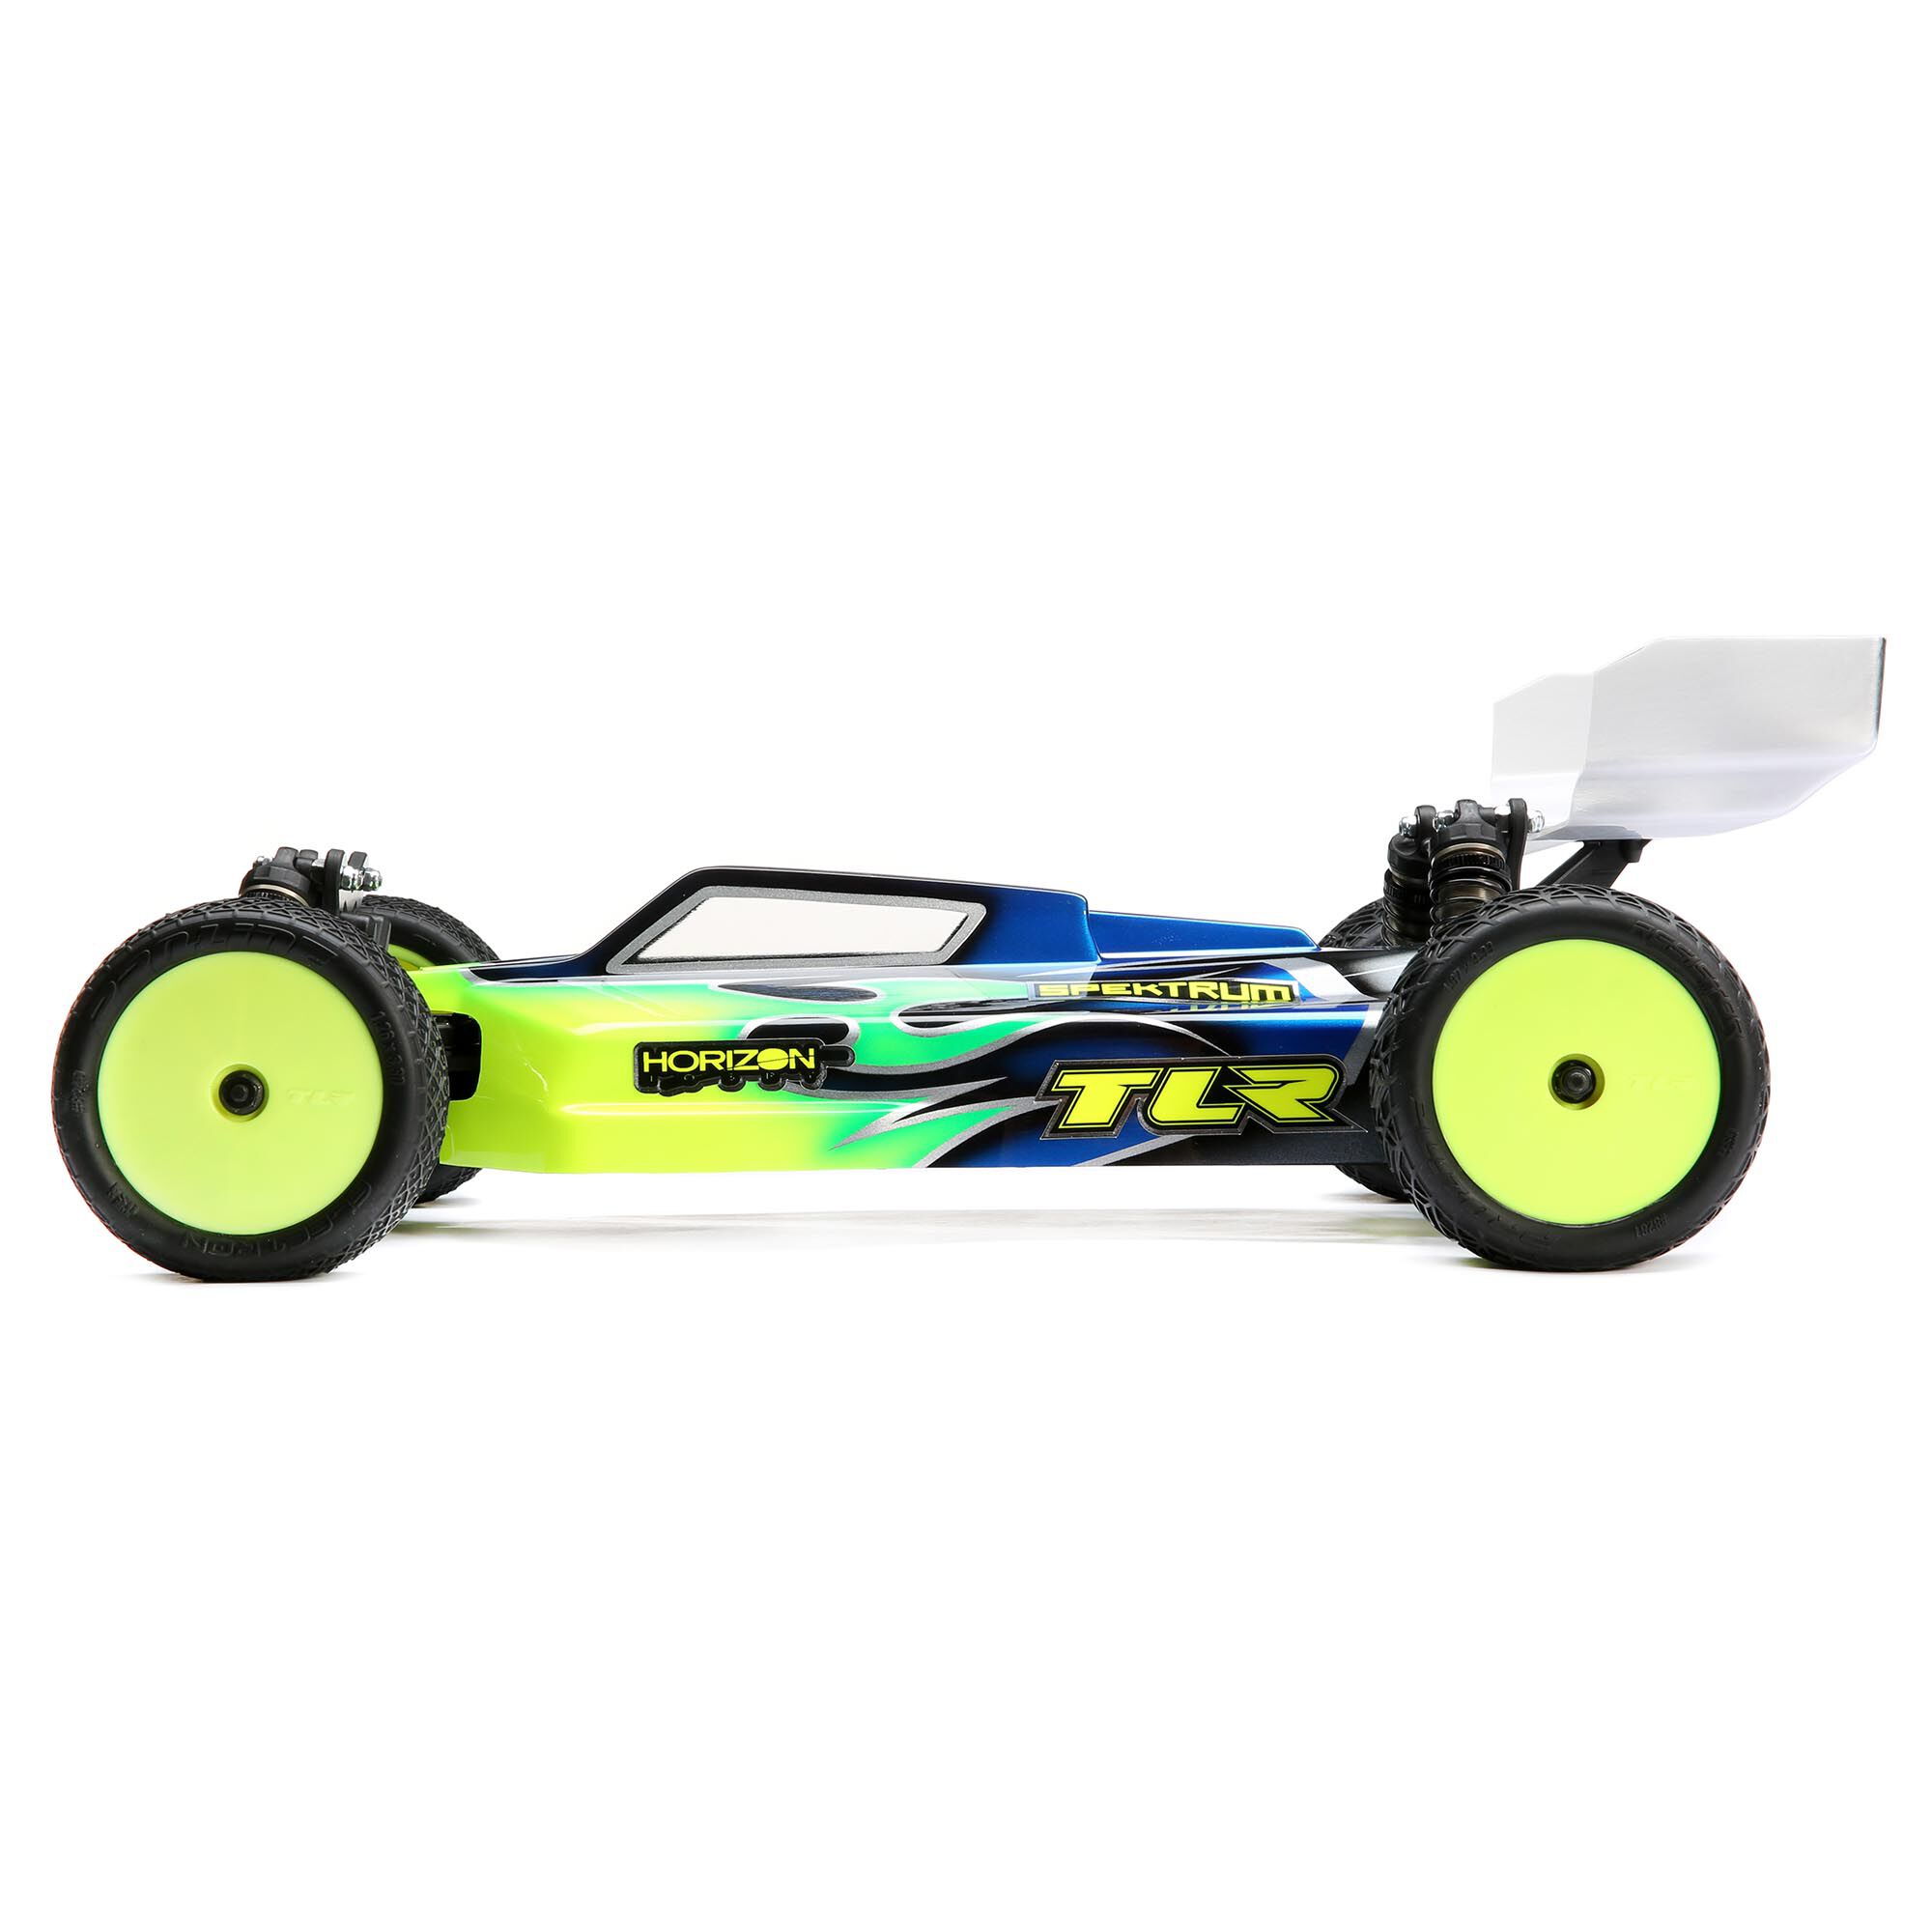 tlr new 4wd buggy